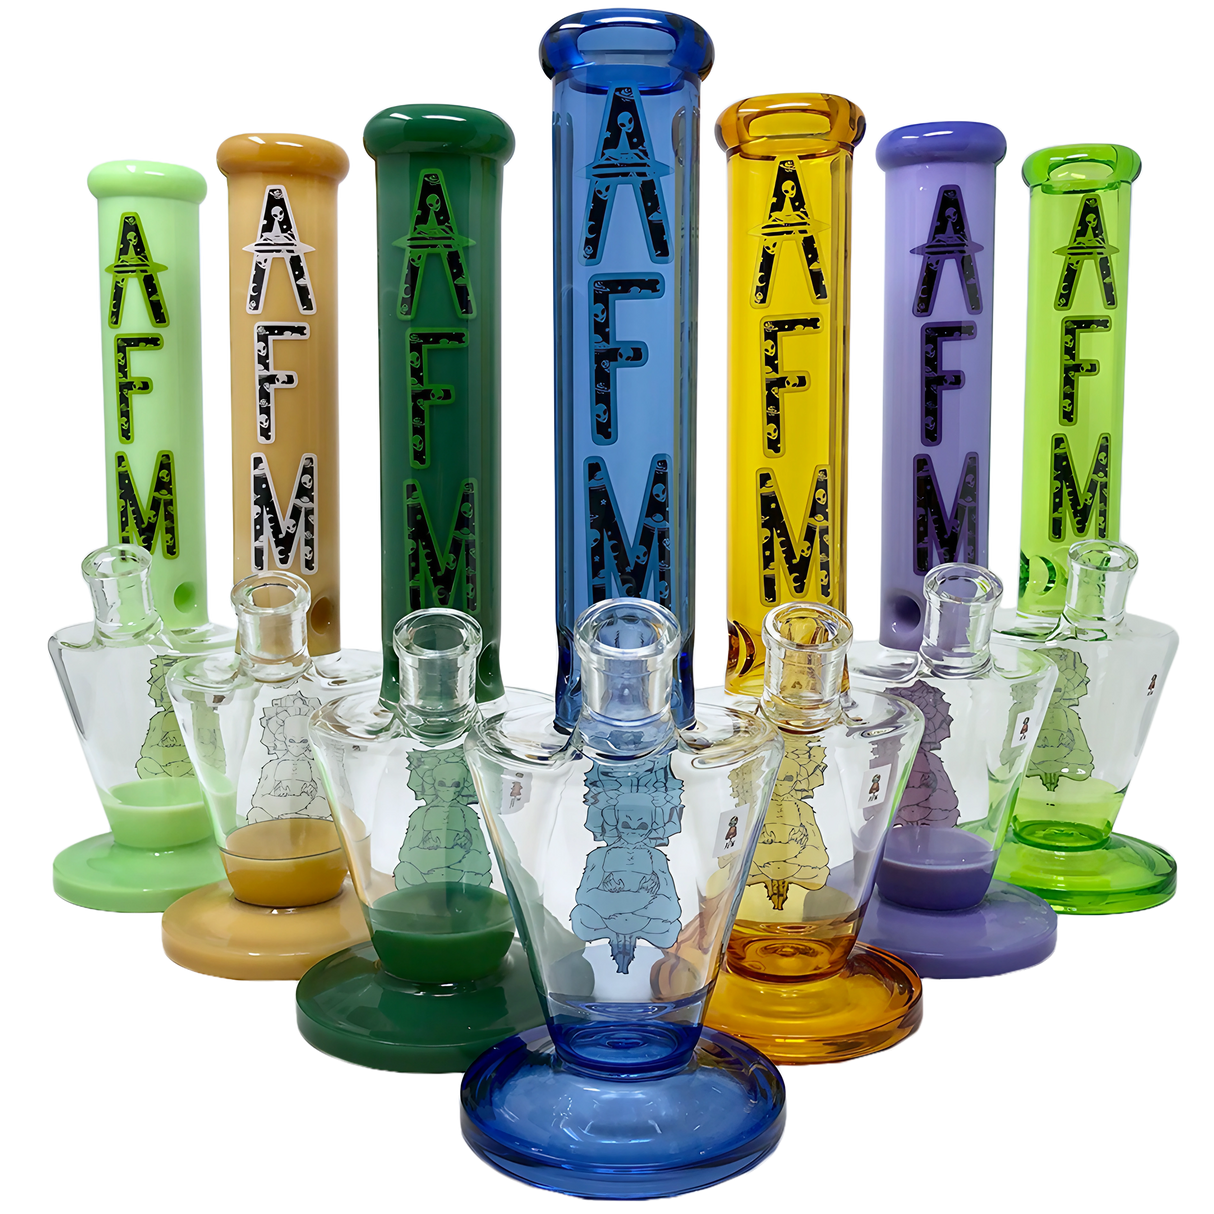 AFM Upsidedown Beaker Bongs in various colors, 14" tall, made of 9mm thick borosilicate glass, front view